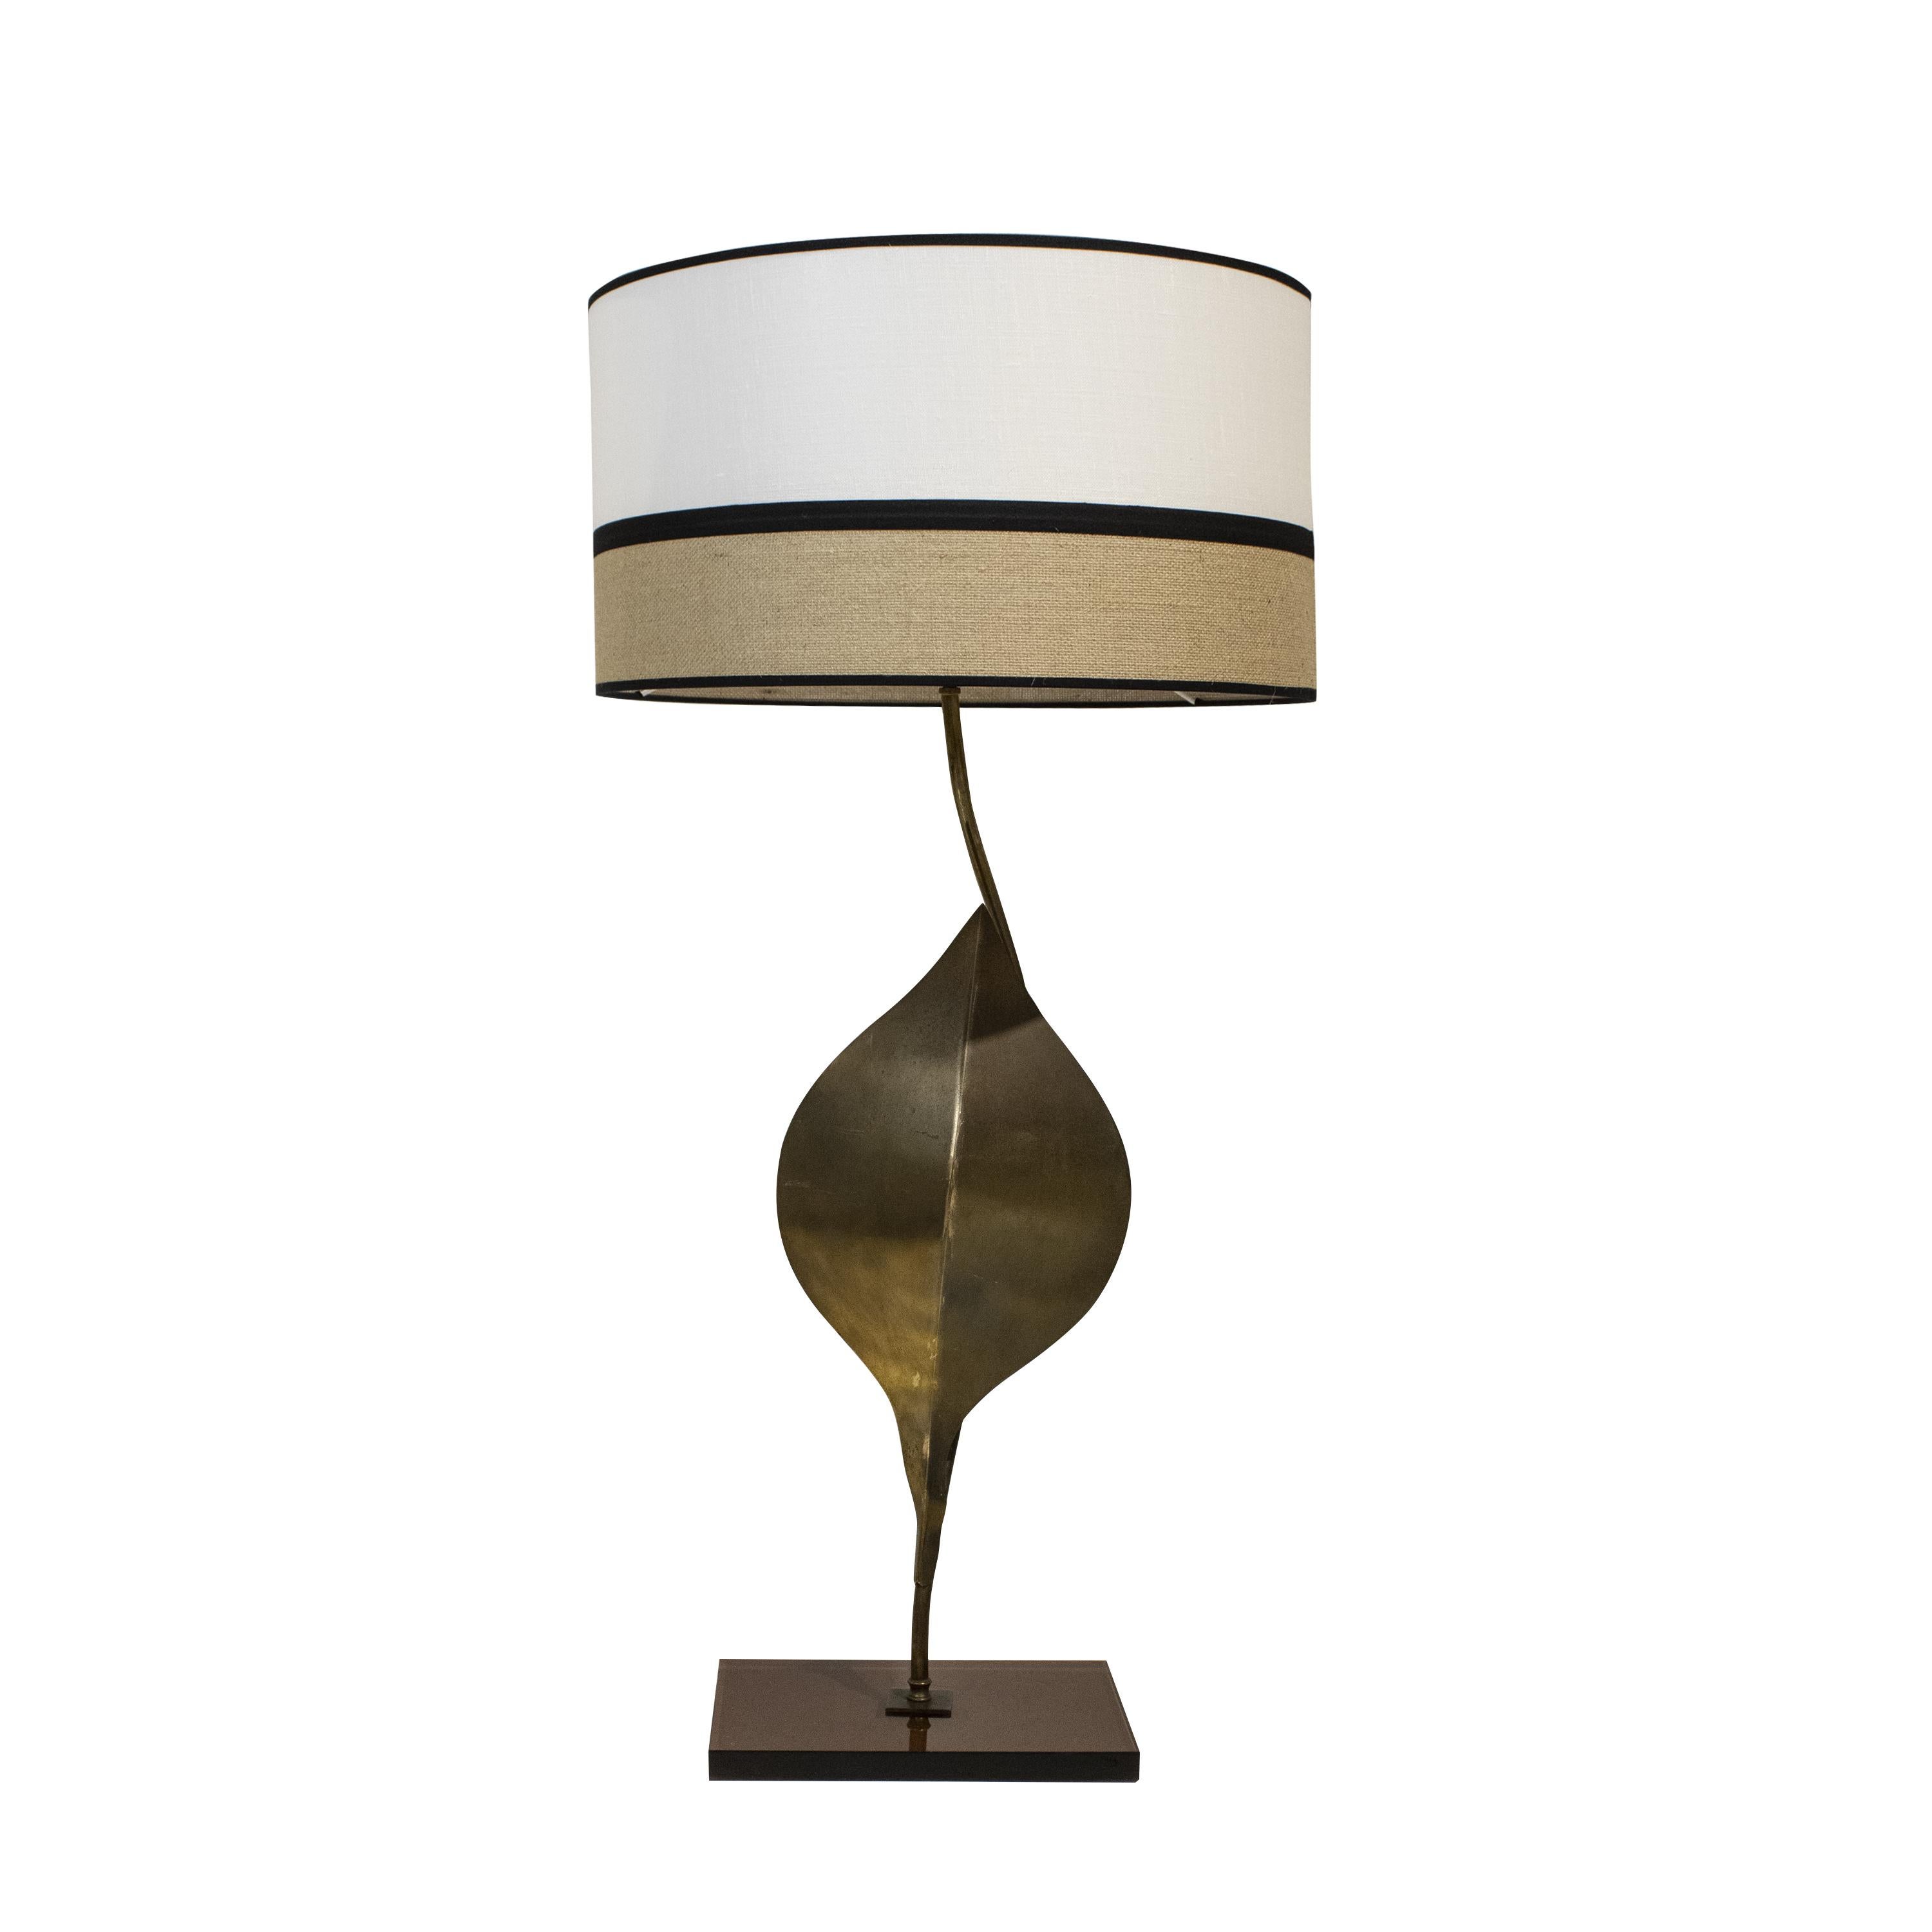 French MidCentury Table Lamp Attributed to Maison Bagues with Leaf-Motifs, France, 1960 For Sale